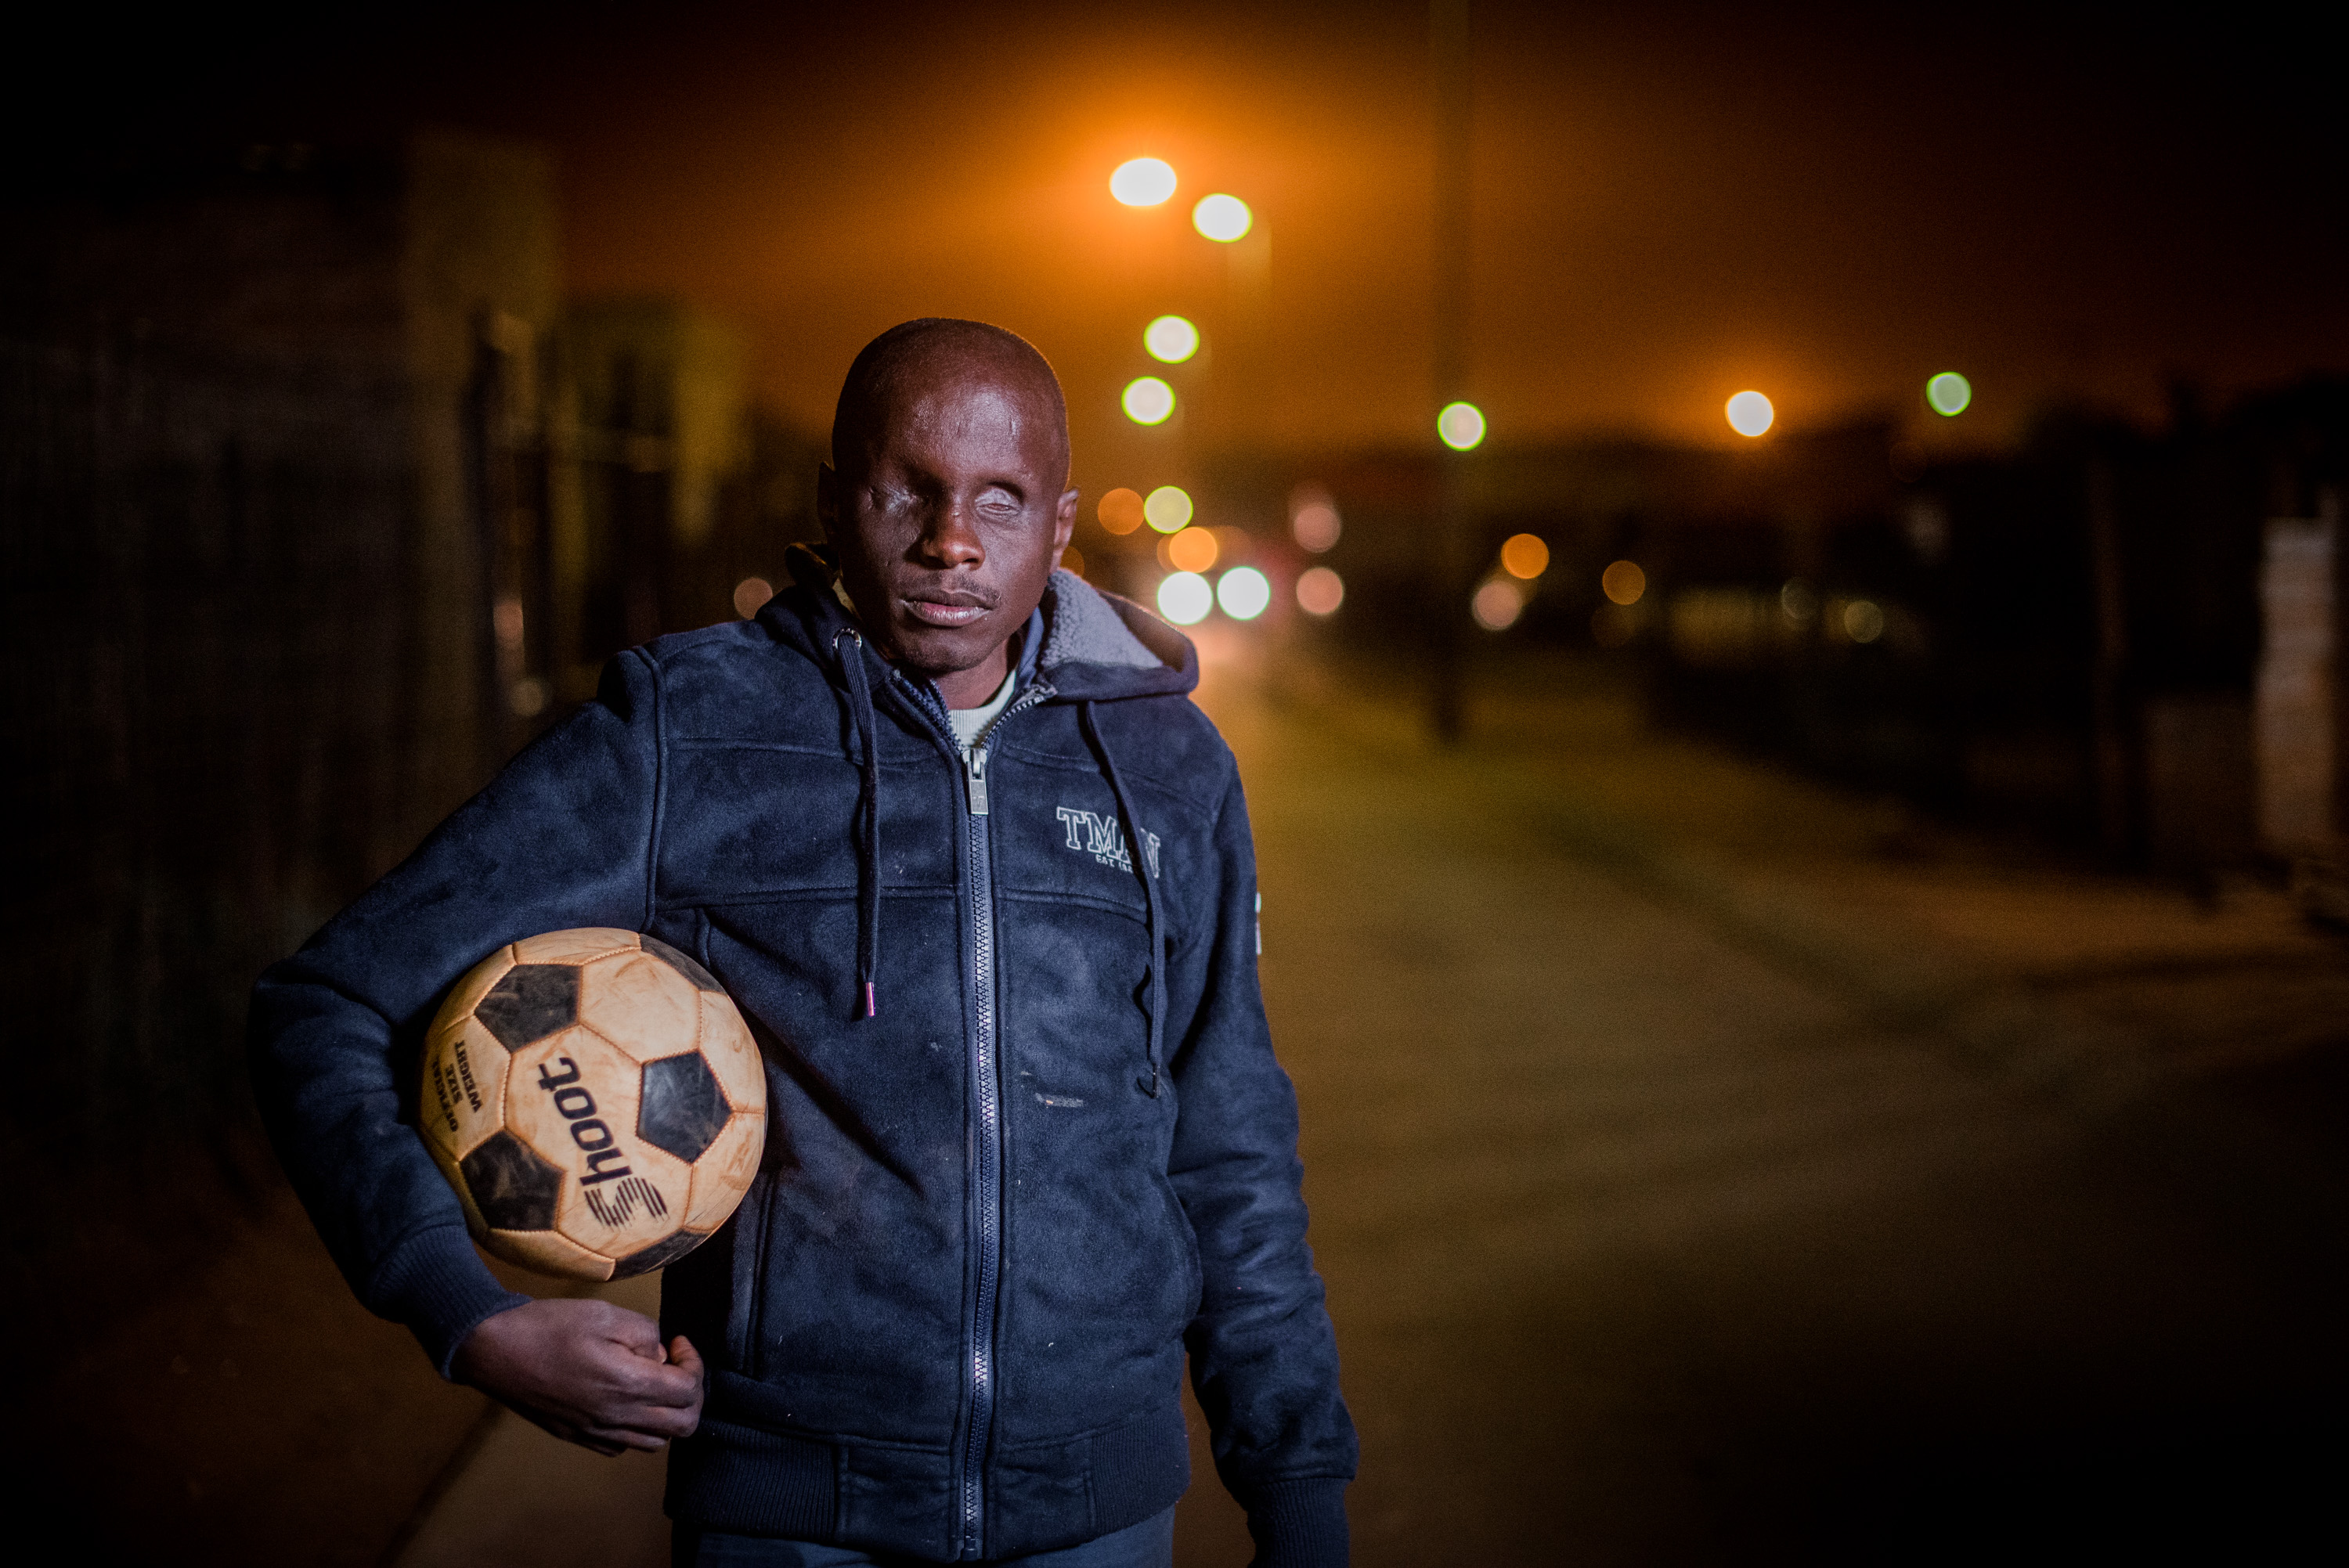 Watch: A blind South African is inspiring the world with his soccer and coaching skills!